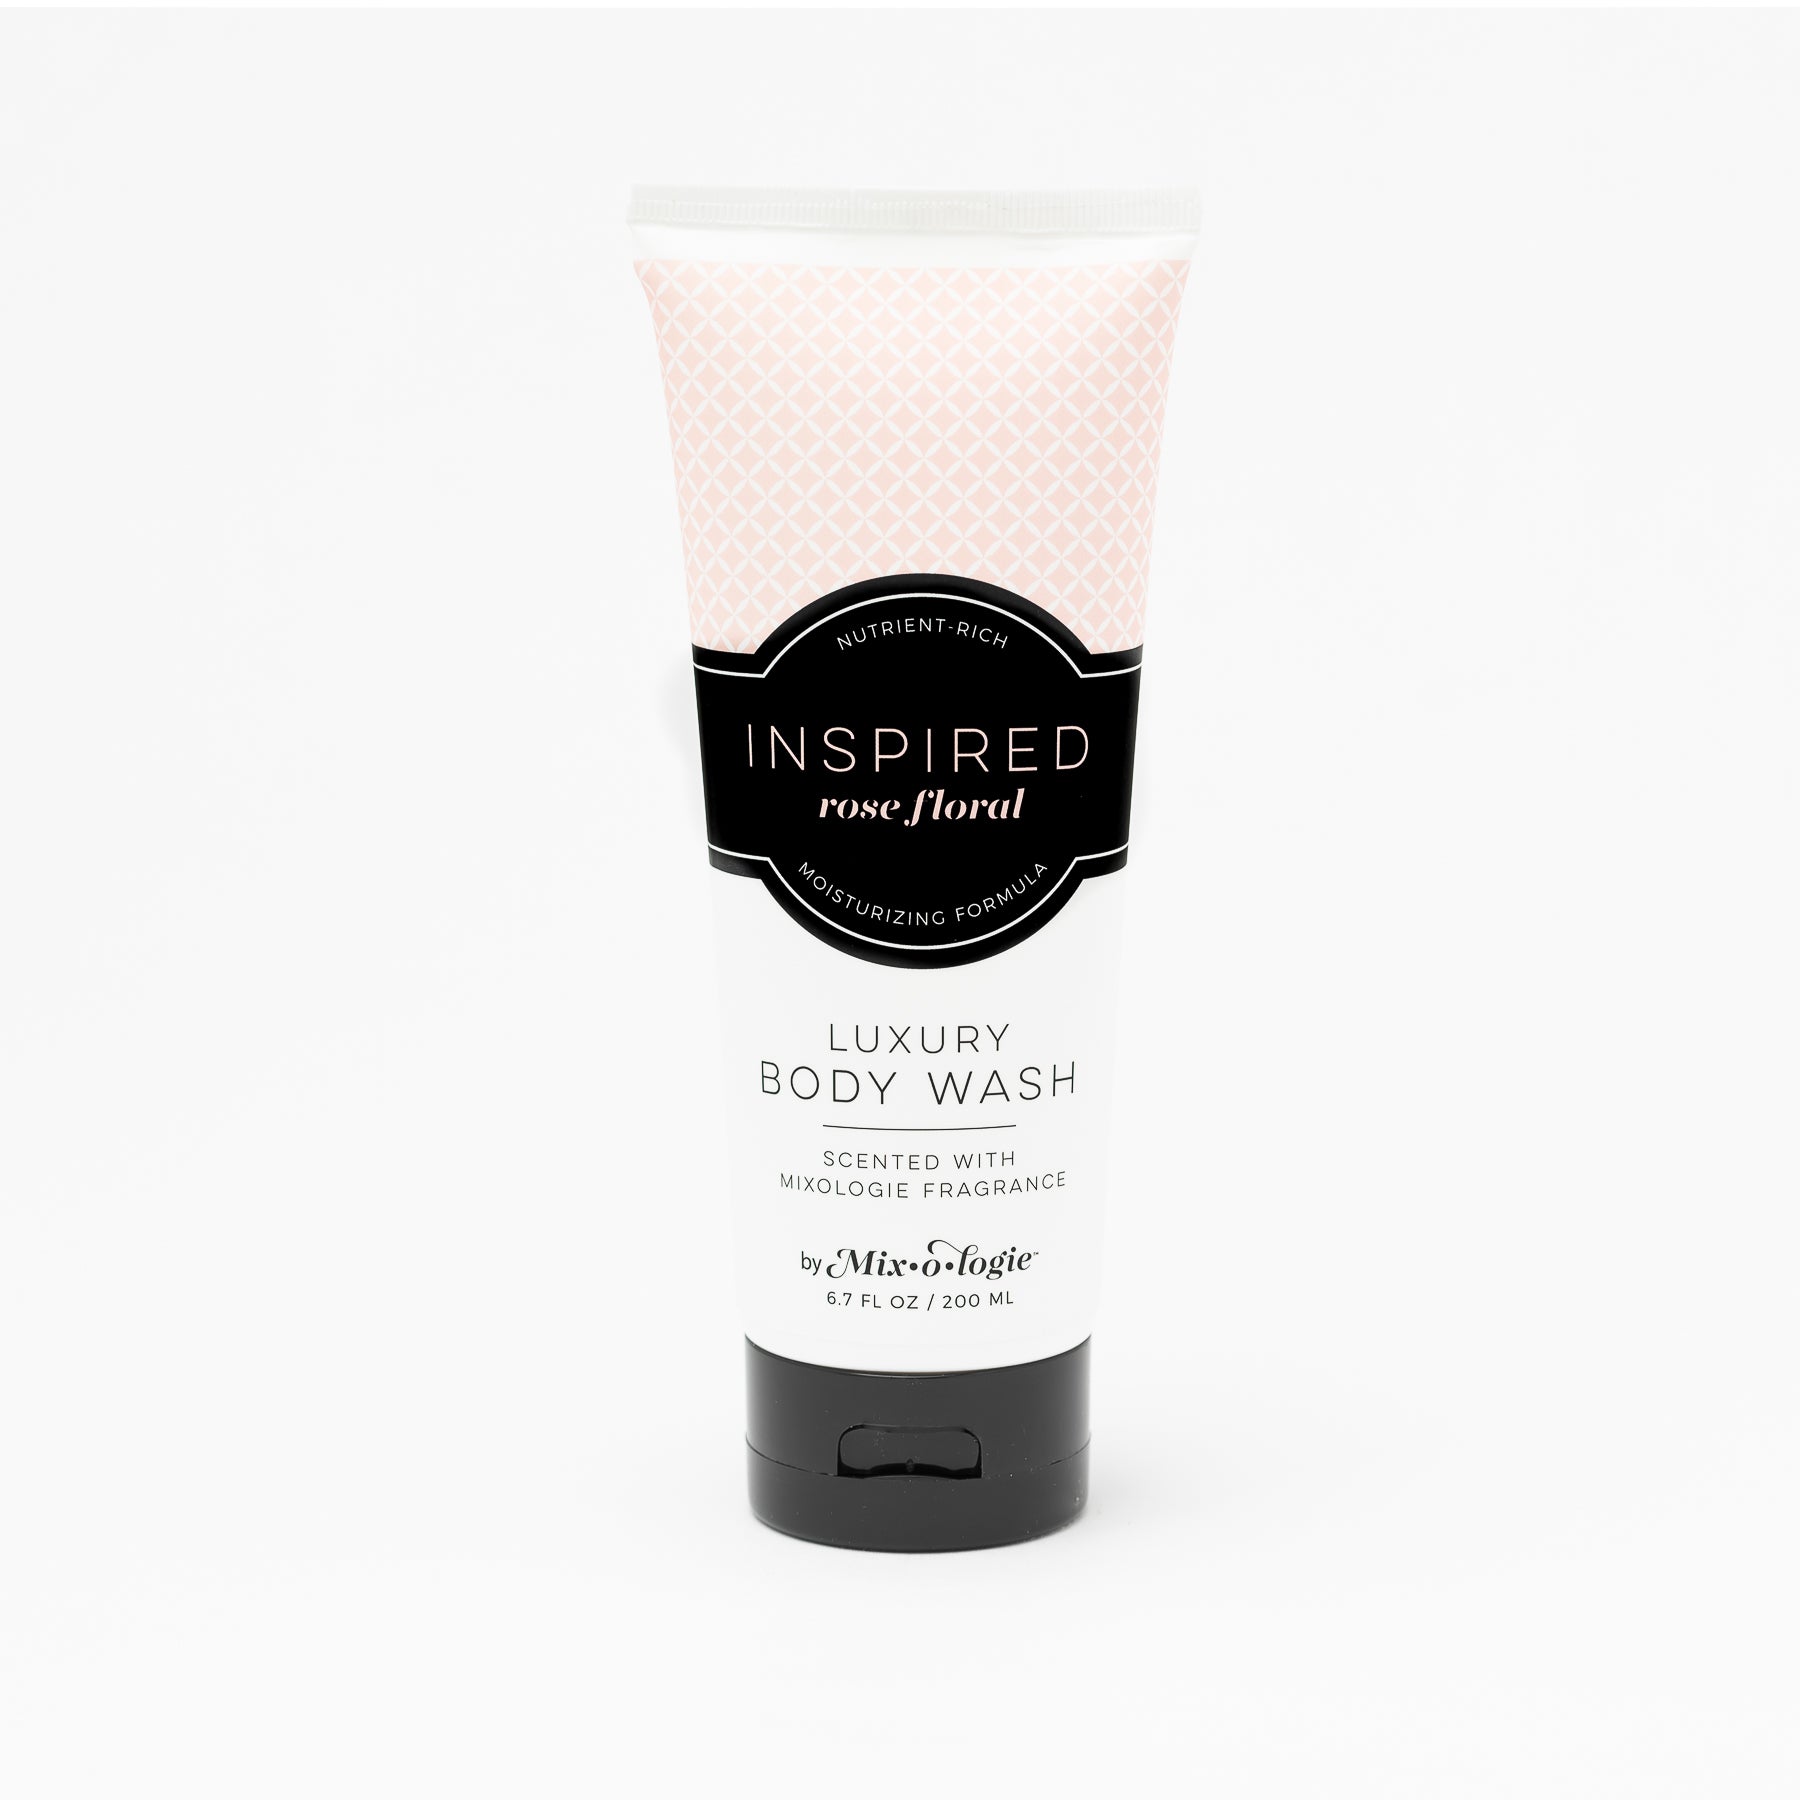 Luxury Body Wash in Mixologie’s Inspired (Rose Floral) in pale pink color sample package with black label. Contains 6.7 fl oz or 200 mL pictured on a white background. 